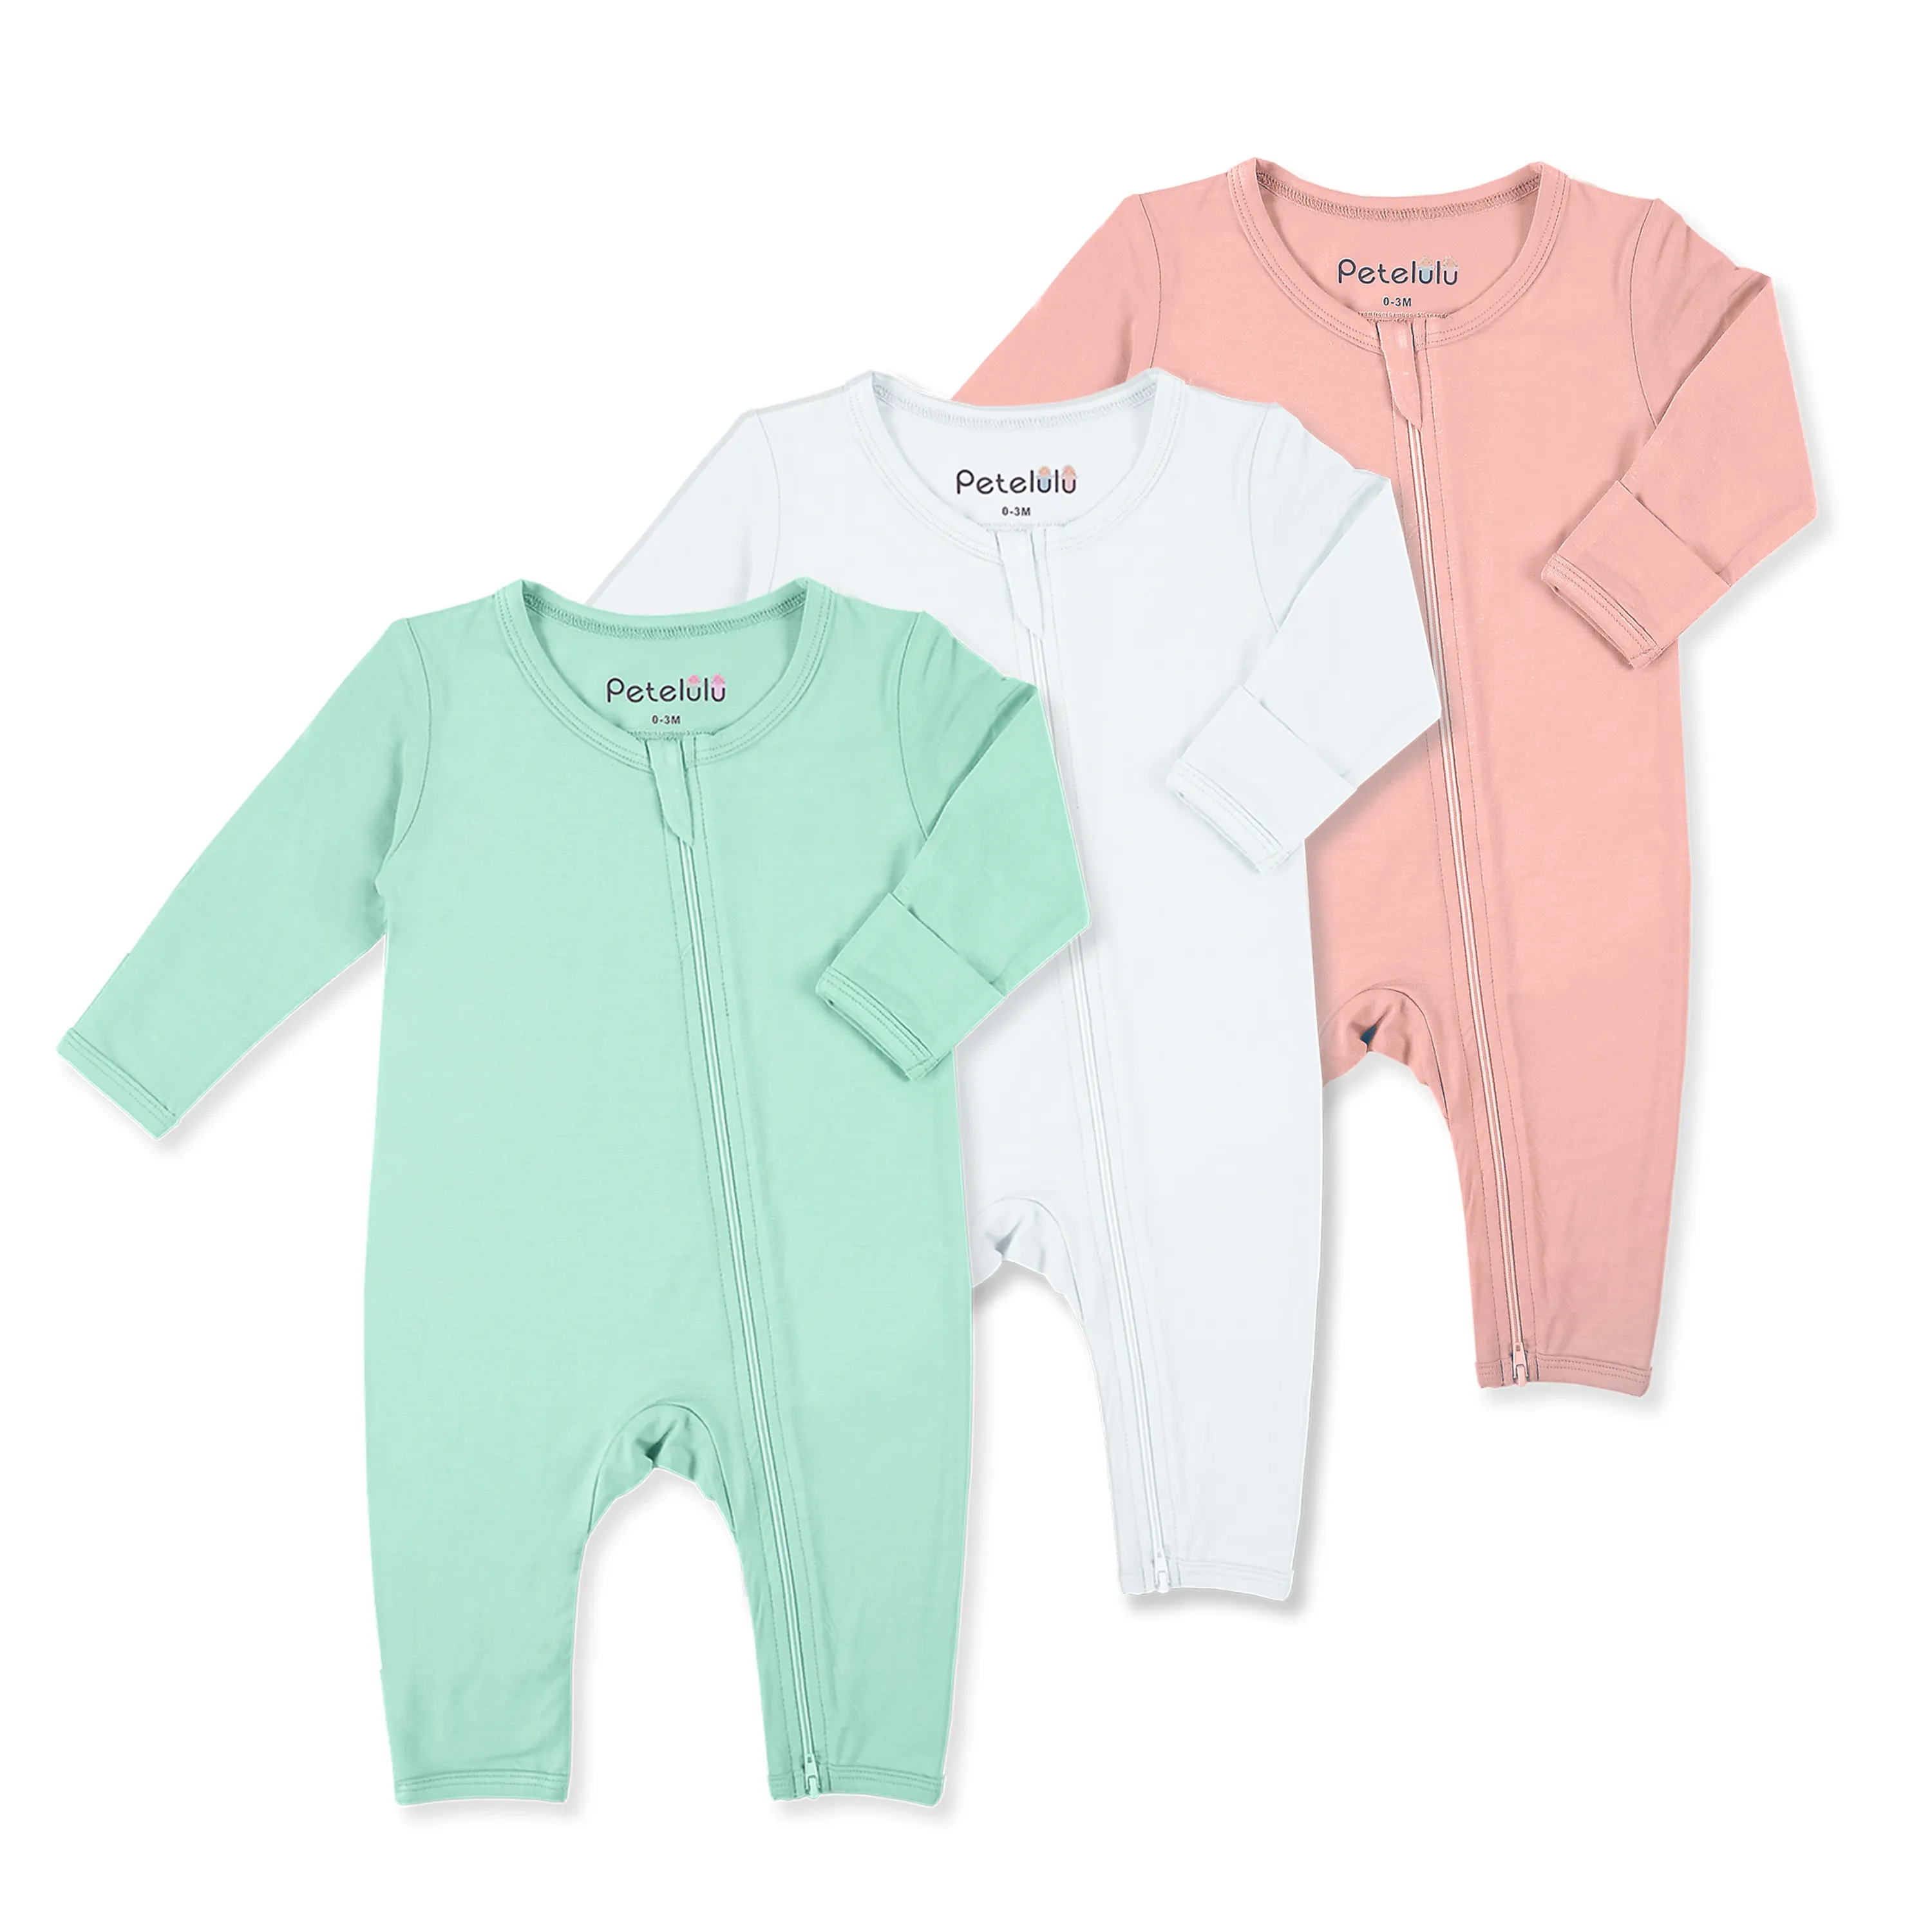 Baby Romper Propusstonel Manufacturer of Comfortable Unisex Baby Pajamas with Zipper 95% Bamboo Fiber Full Picture Knitted 360